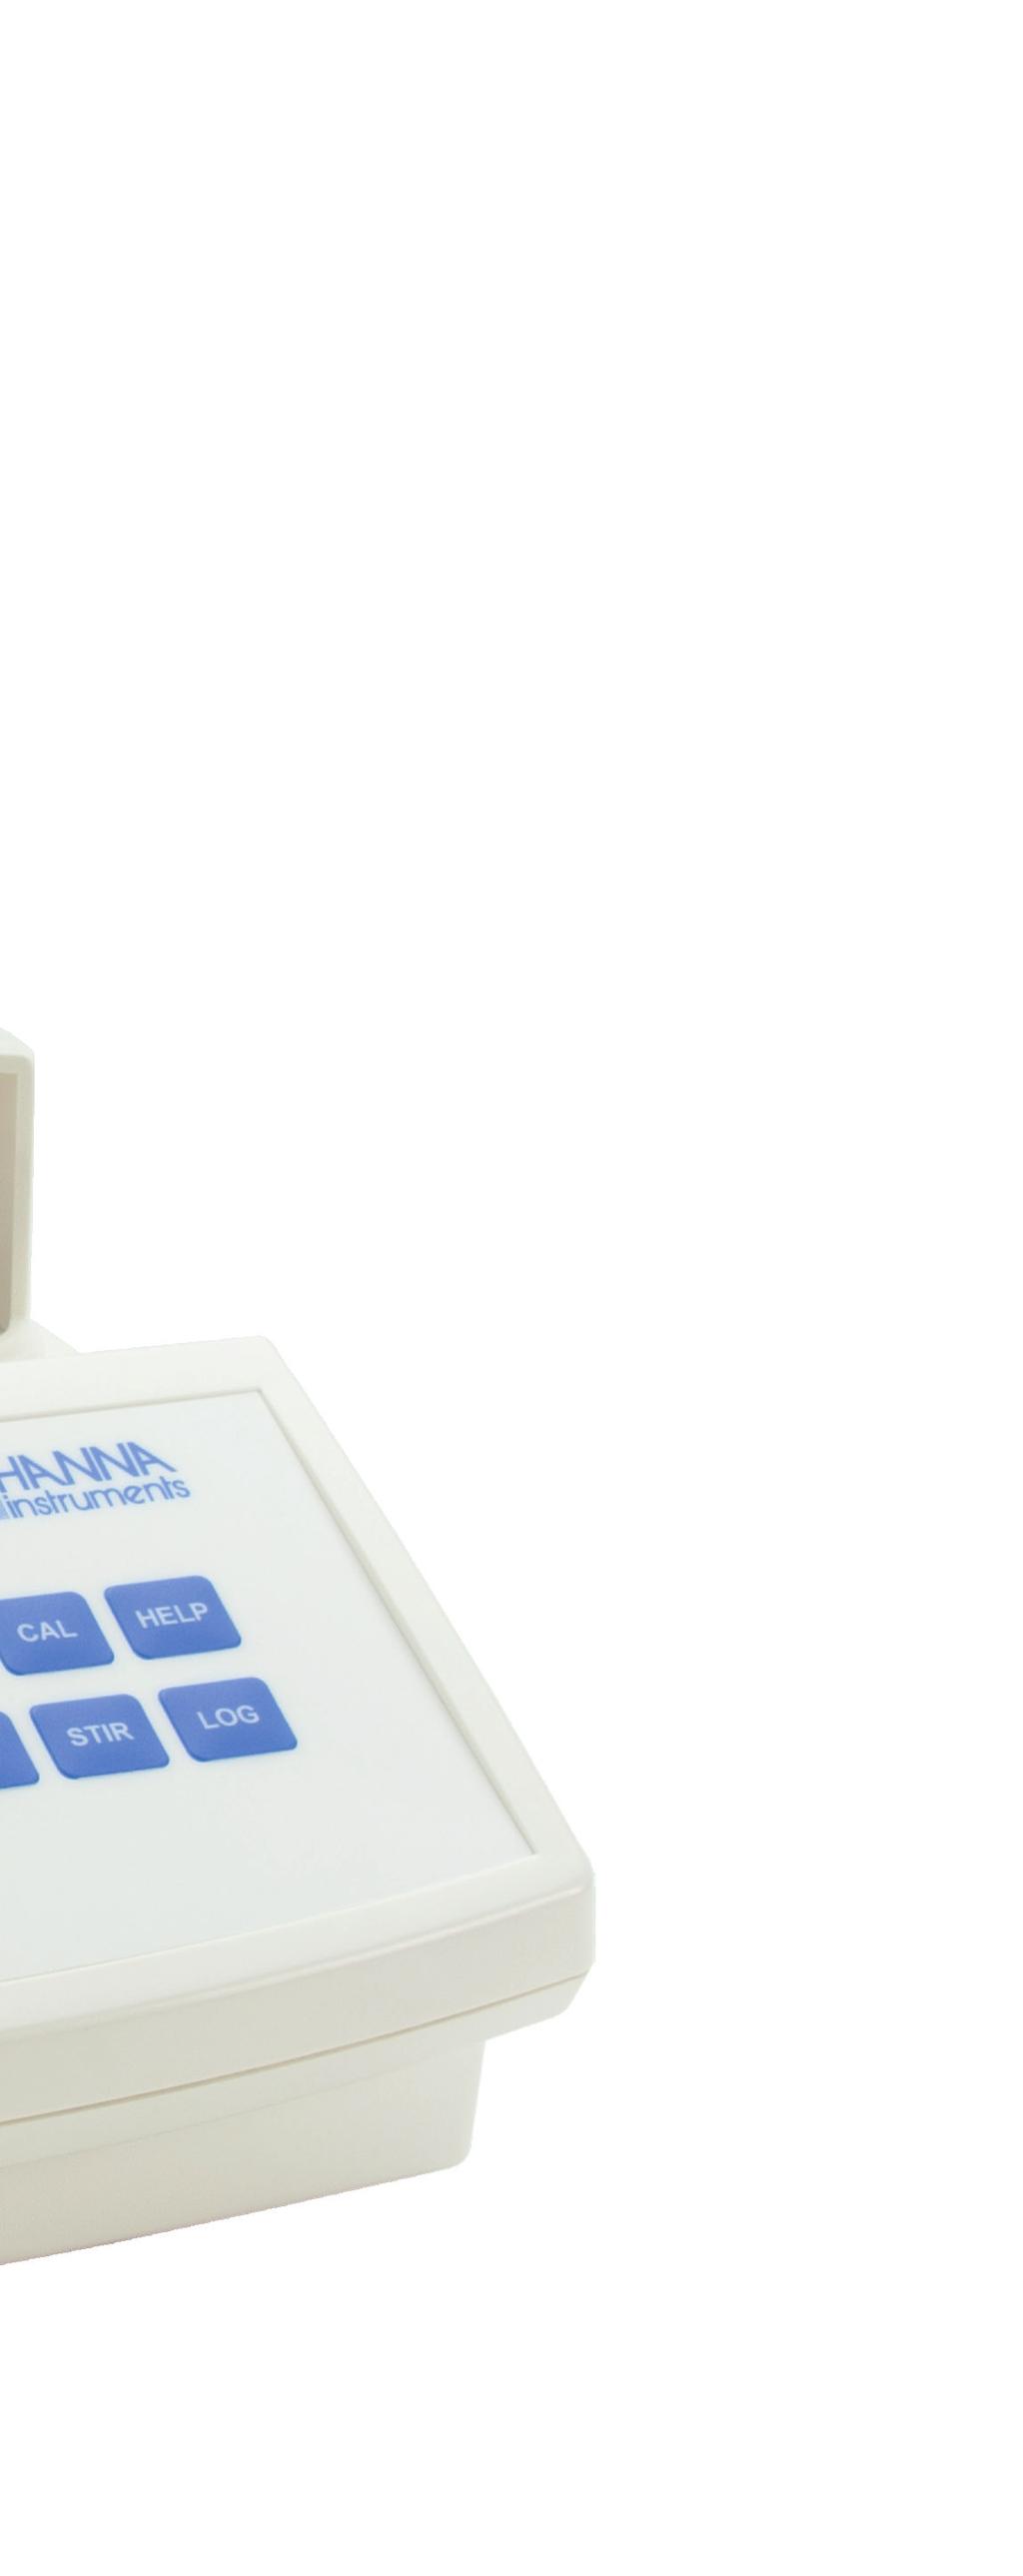 This new generation of mini automatic titrator improves upon the titrant delivery system and measuring ranges for increased accuracy compared to previous models.